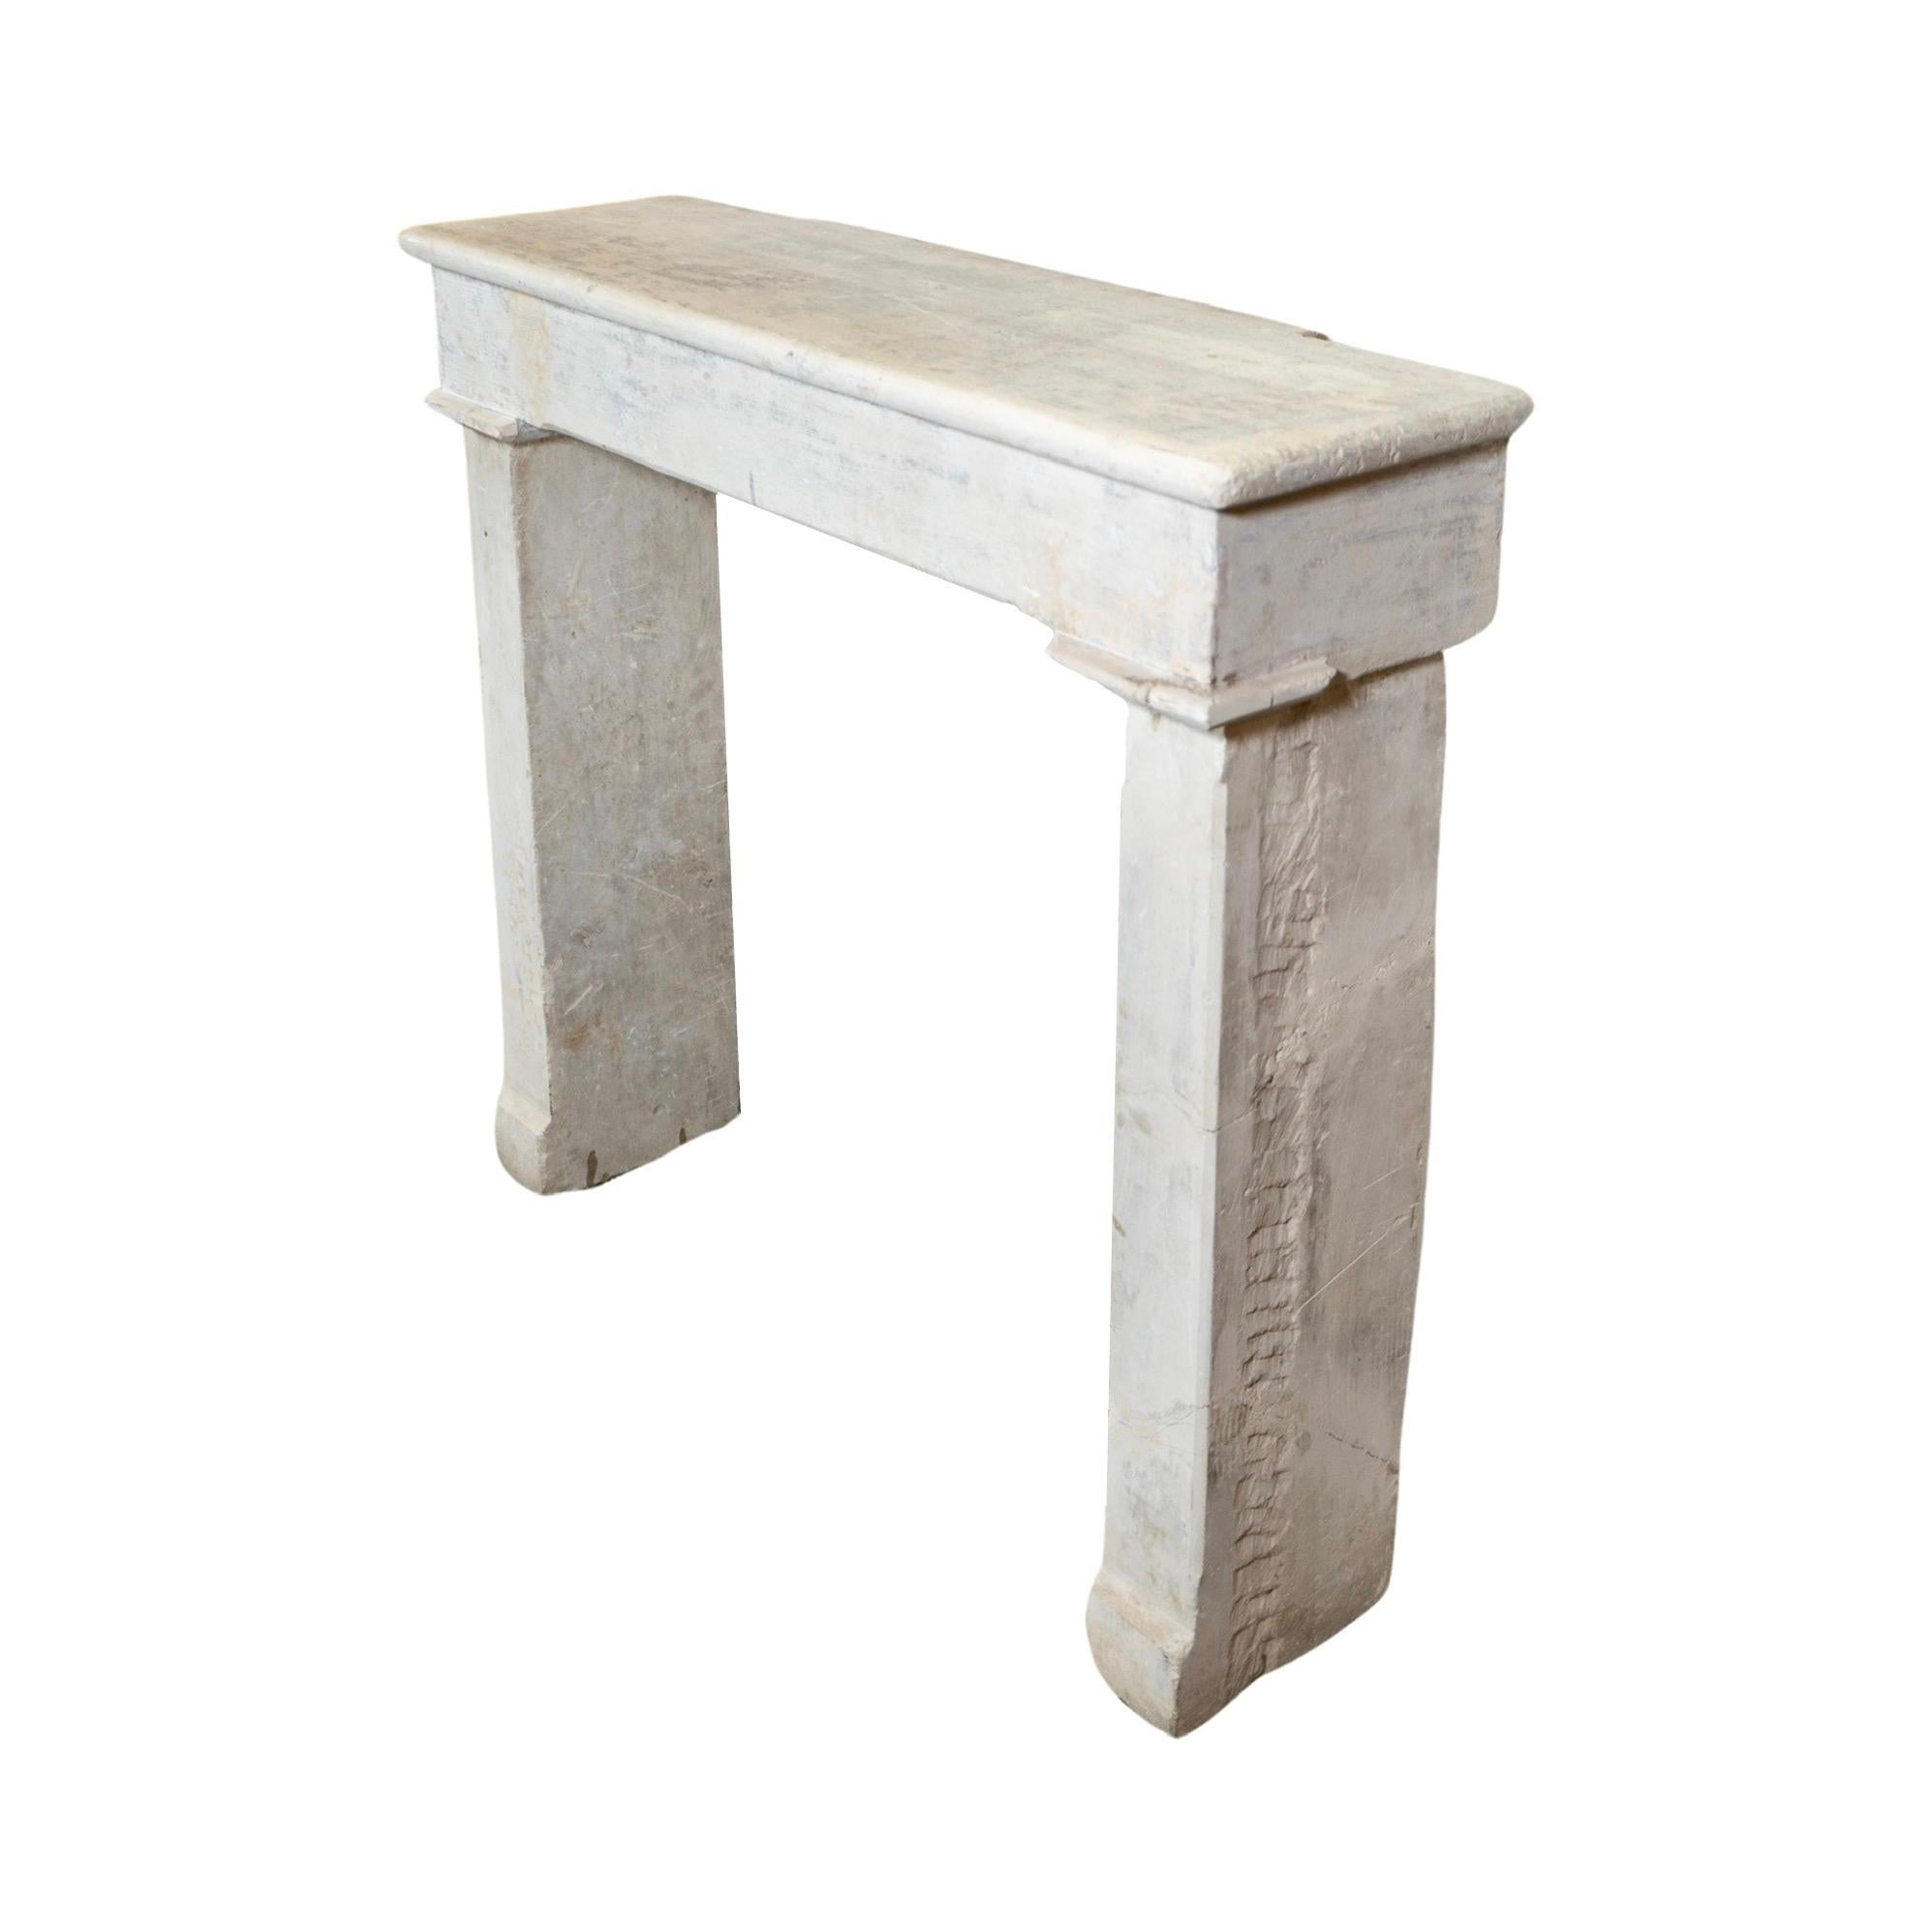 This French Limestone Mantel brings the beauty and history of 18th century France into your home. Its farmhouse design, inspired by Louis XVI style, adds a touch of elegance. Made from limestone, this small and sleek mantel is both durable and